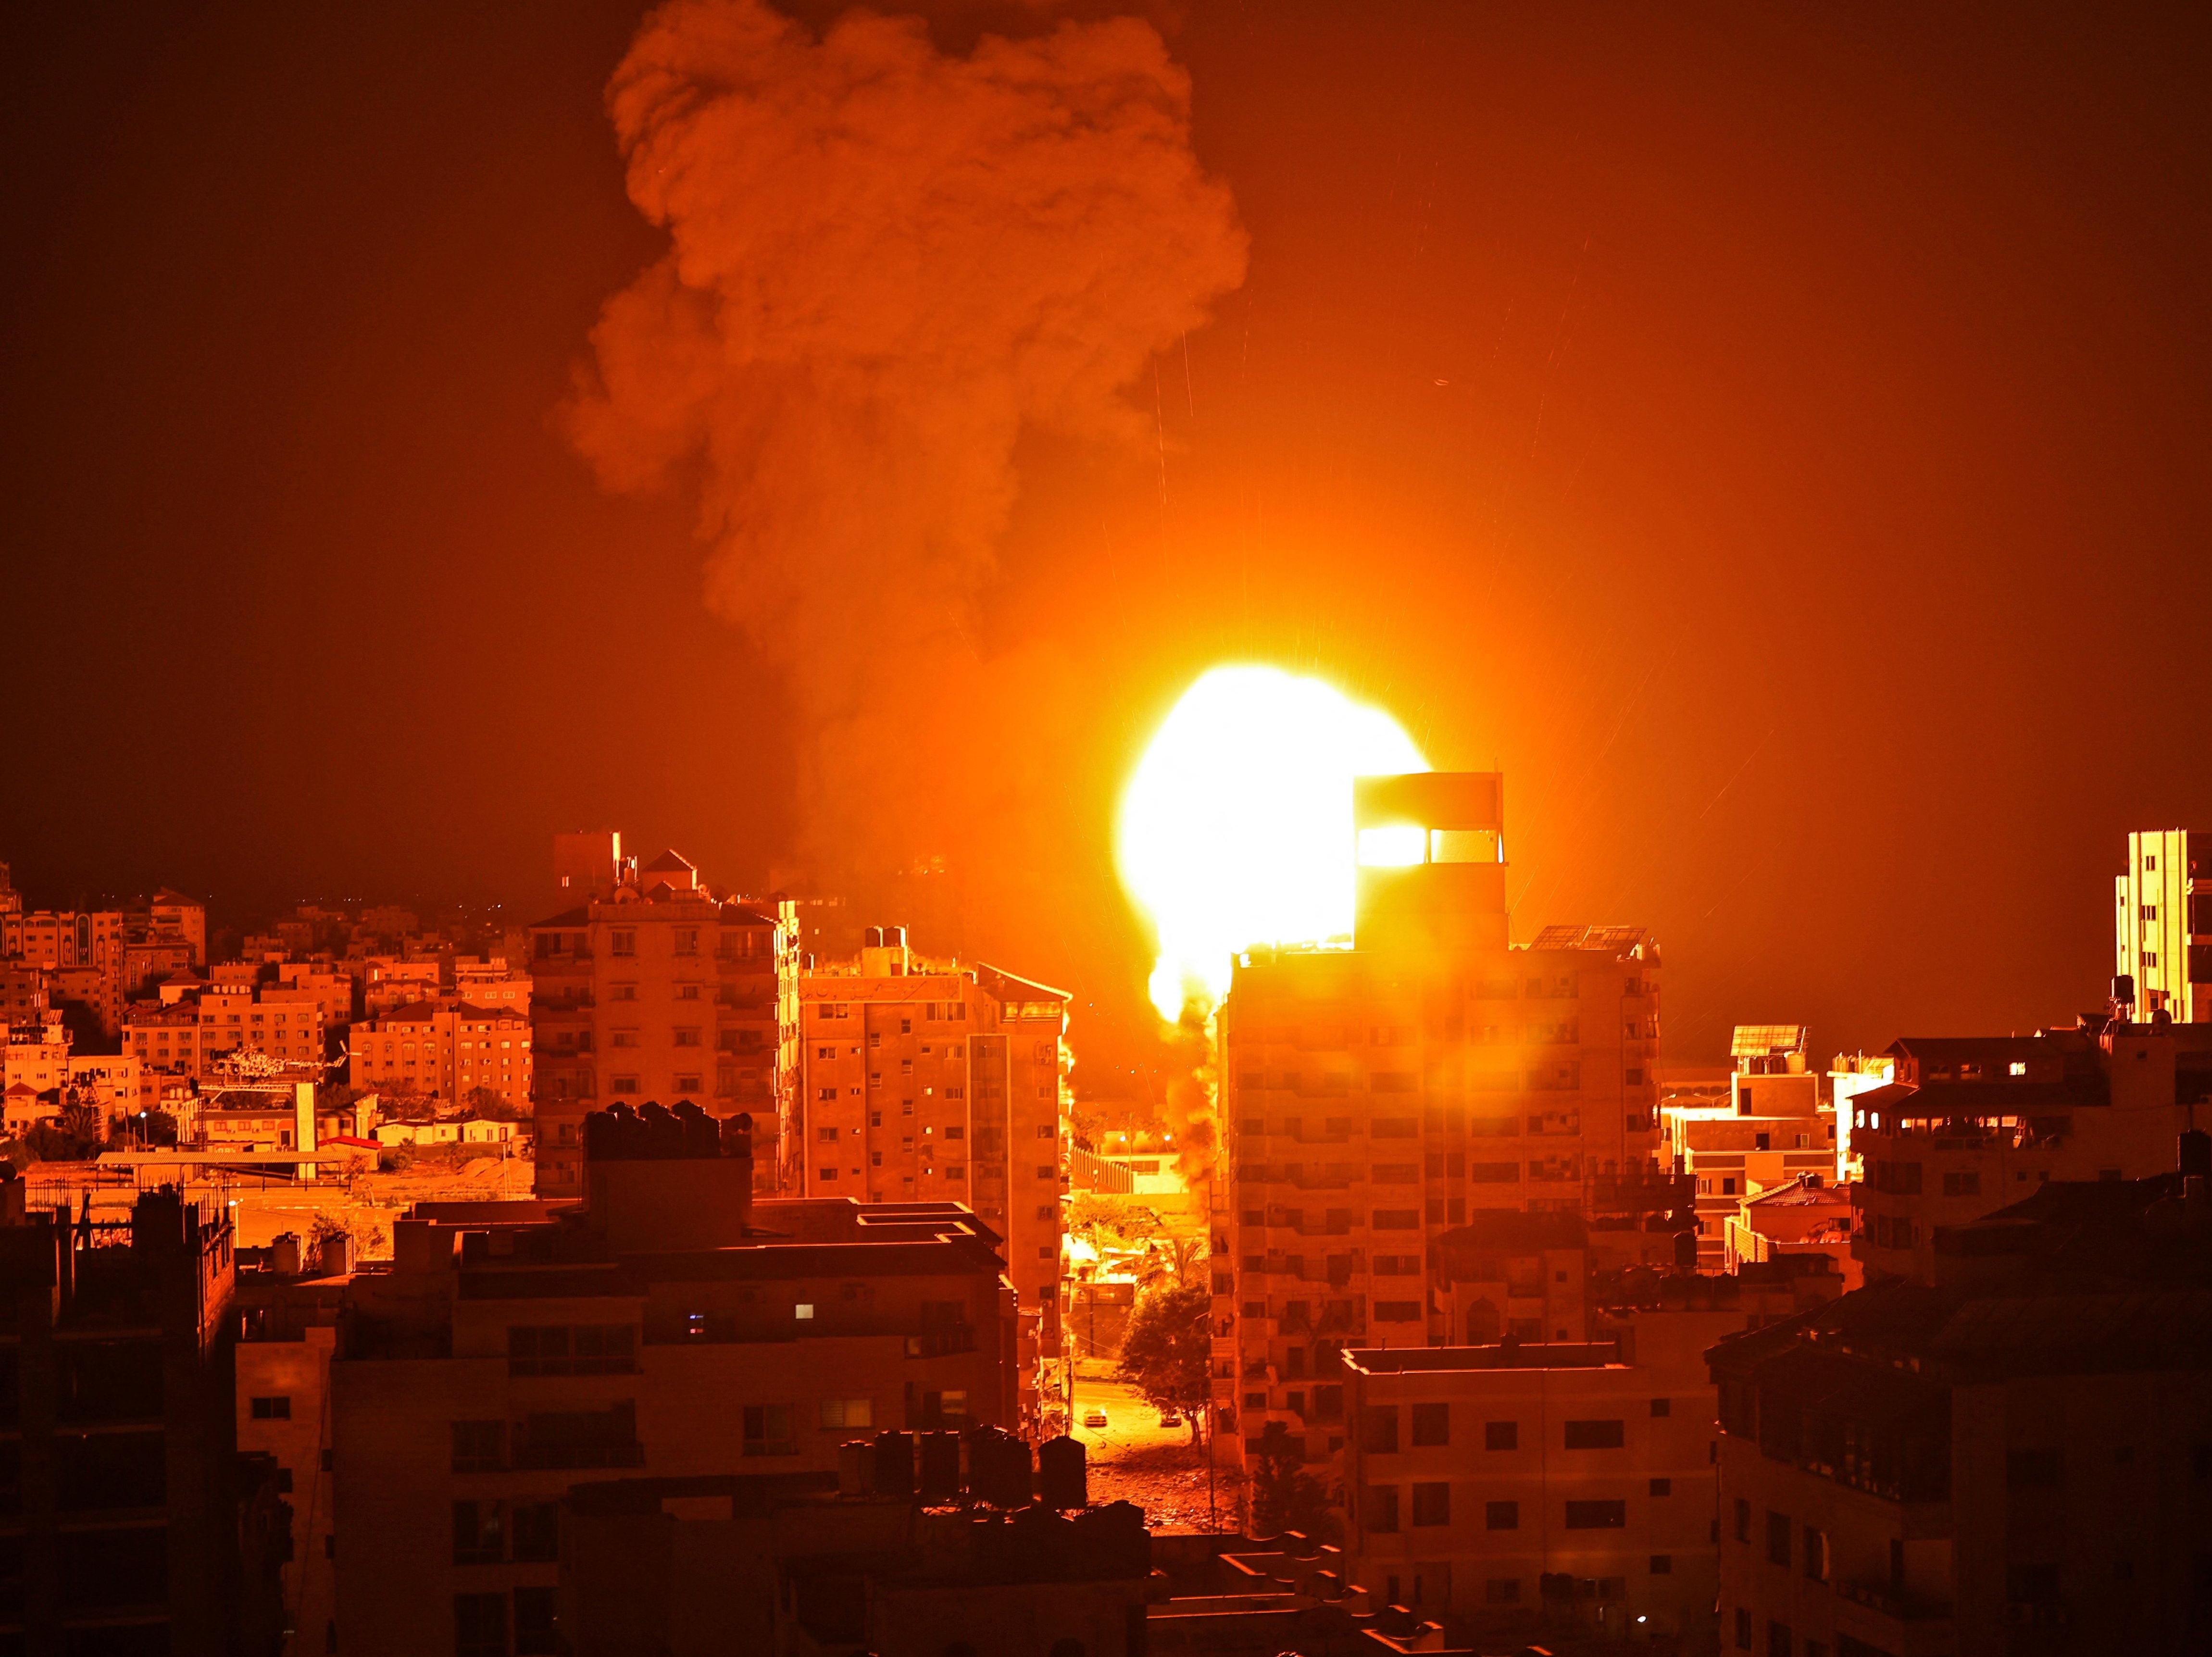 An Israeli airstrike on Gaza City during the early hours of Monday